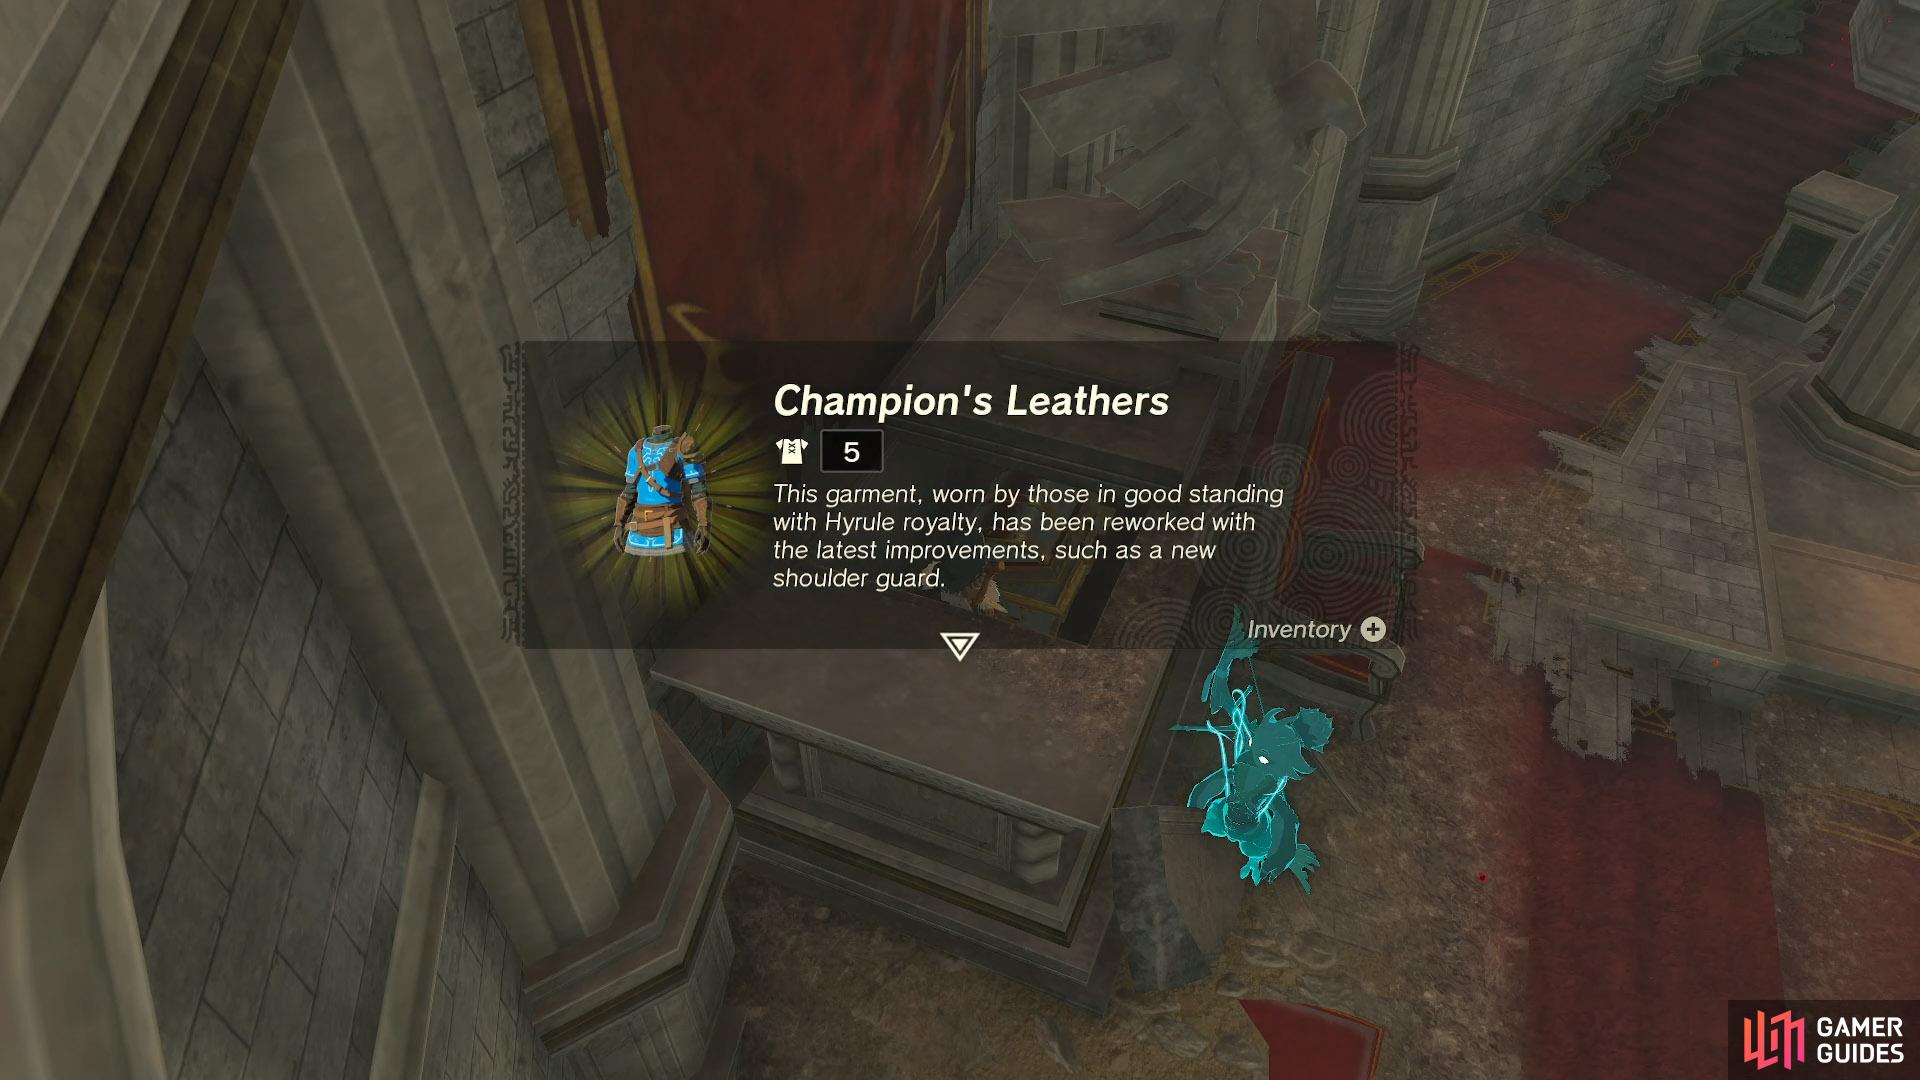 The Champion's Leathers description once acquired